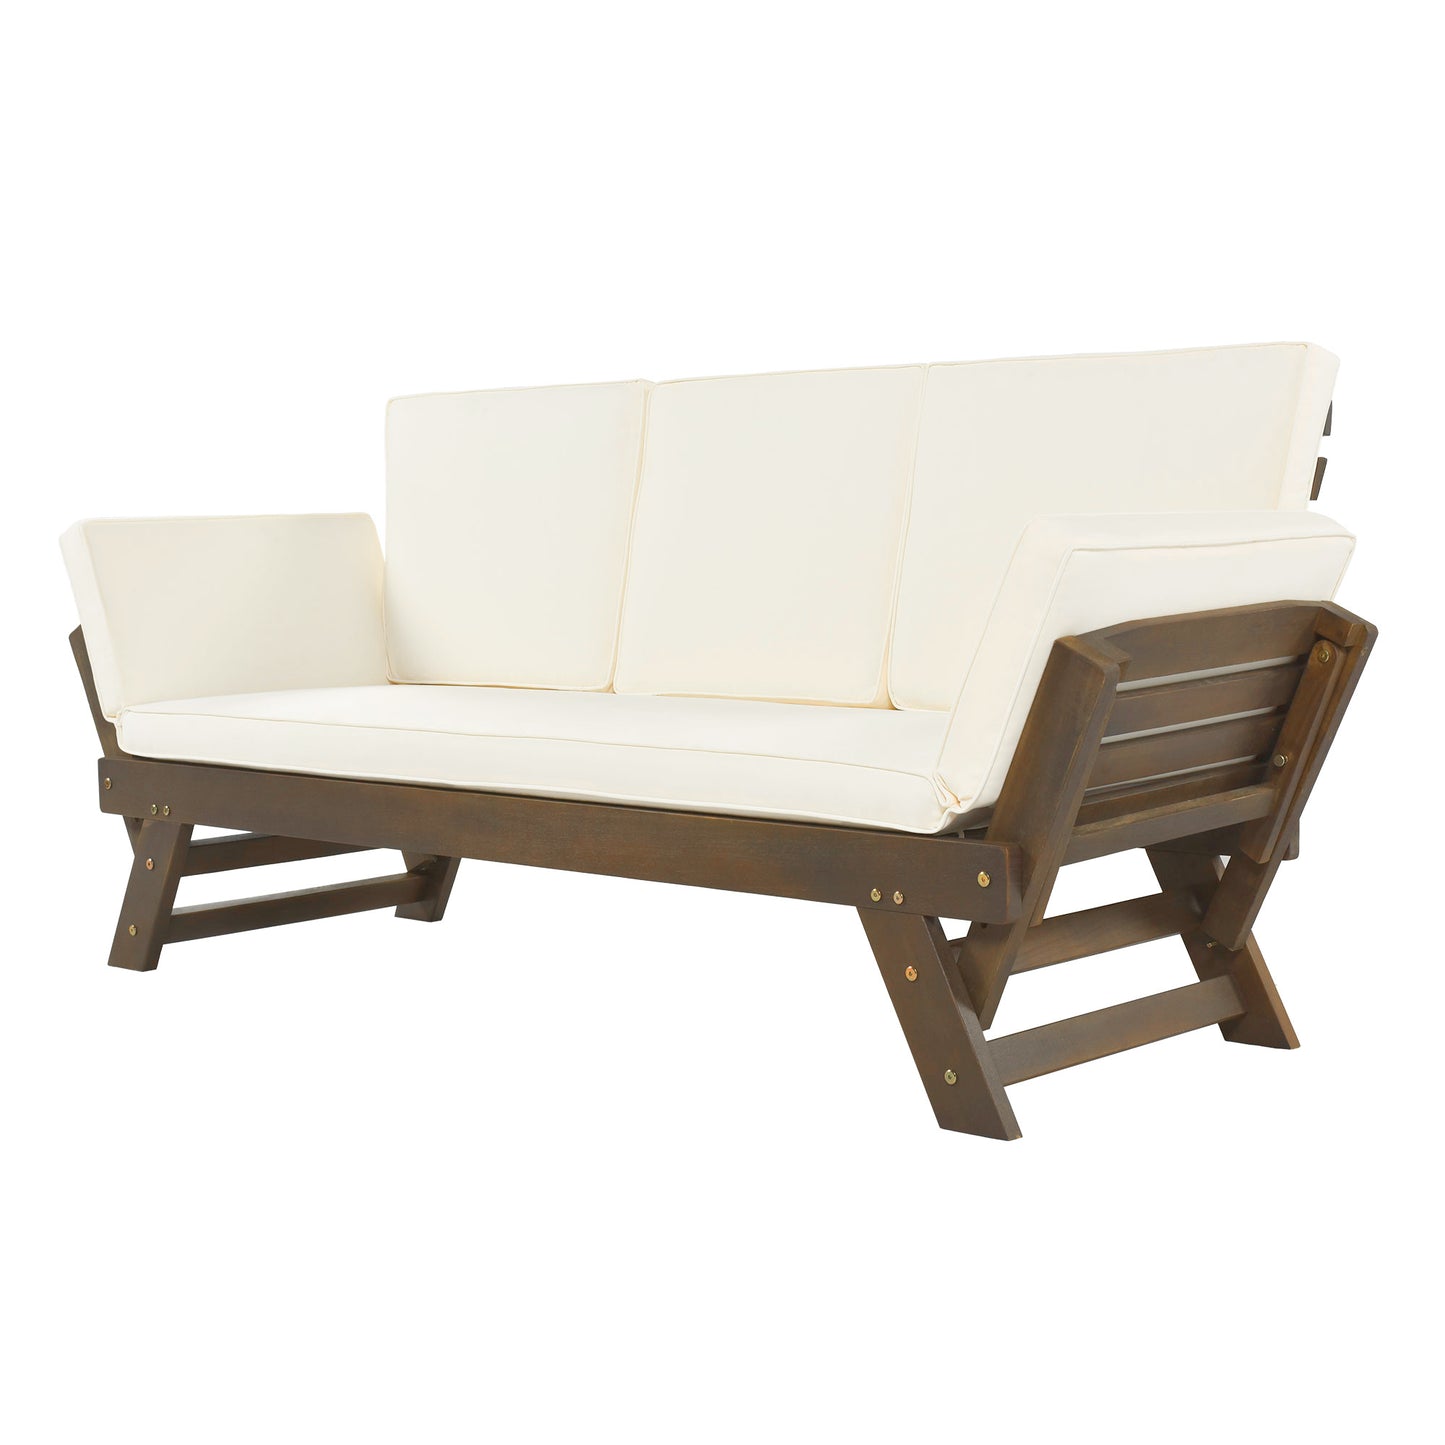 Outdoor Adjustable Patio, Daybed Sofa Chaise Lounge, Cushions